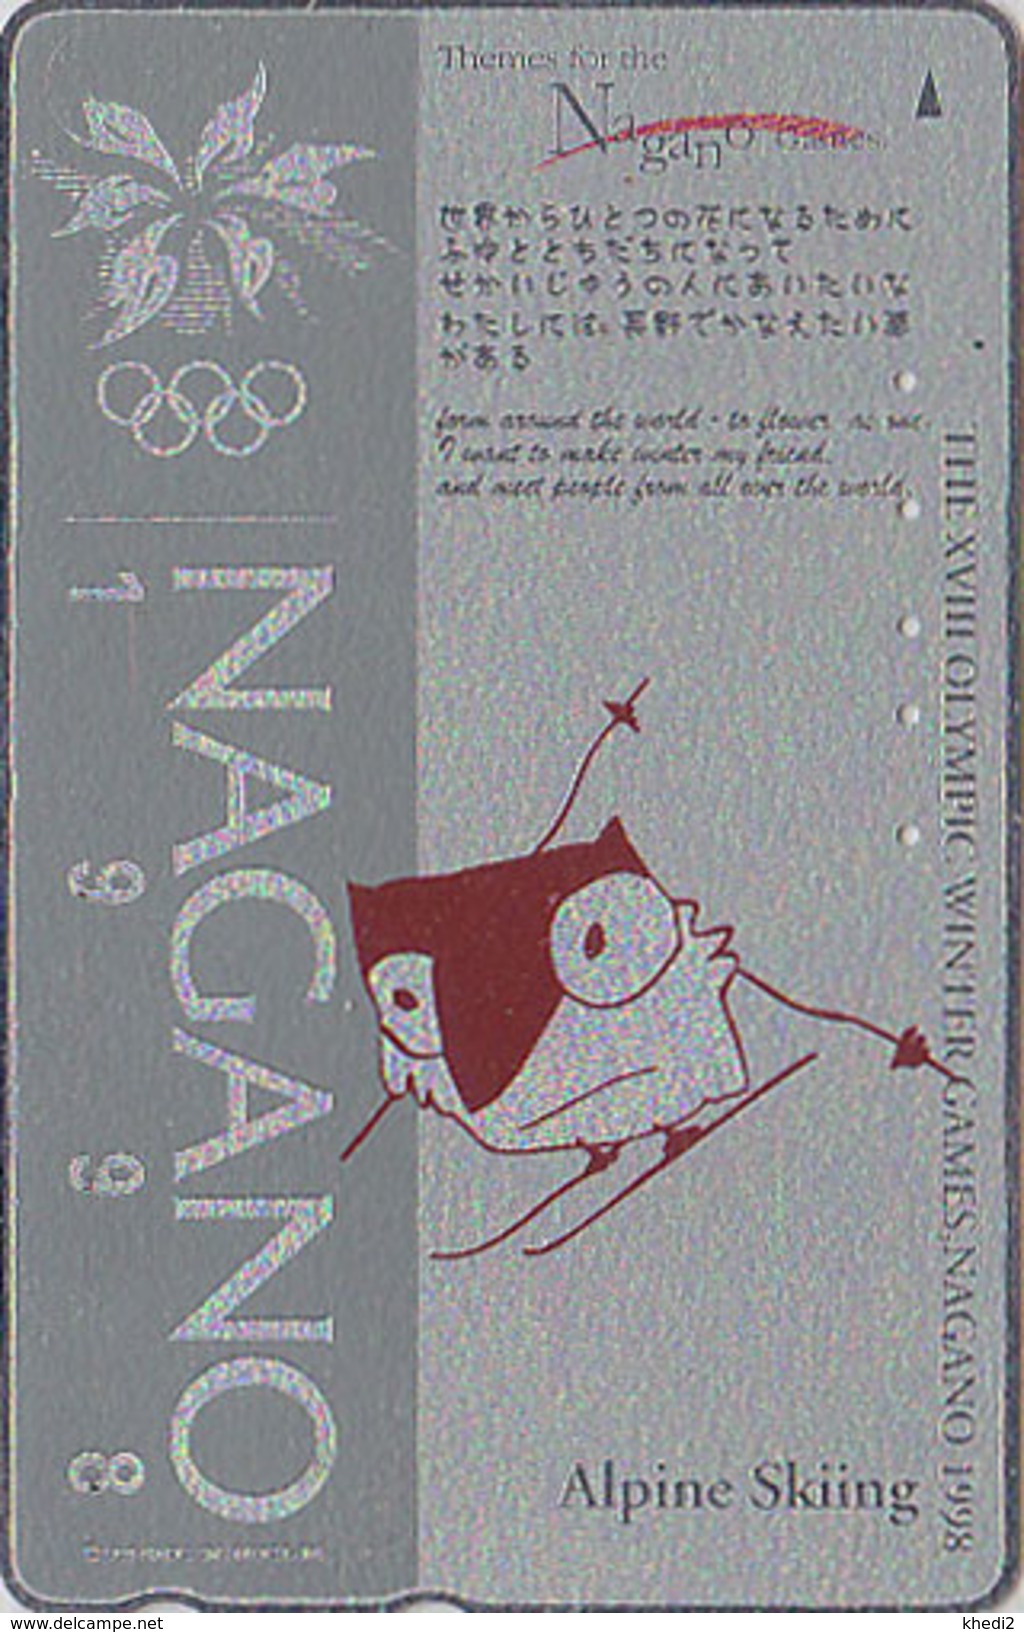 TC ARGENT JAPON / 271-03298 - HIBOU Jeux Olympiques NAGANO SKI ALPIN - OWL OLYMPIC GAMES JAPAN SILVER Free Pc - 3940 - Olympische Spiele